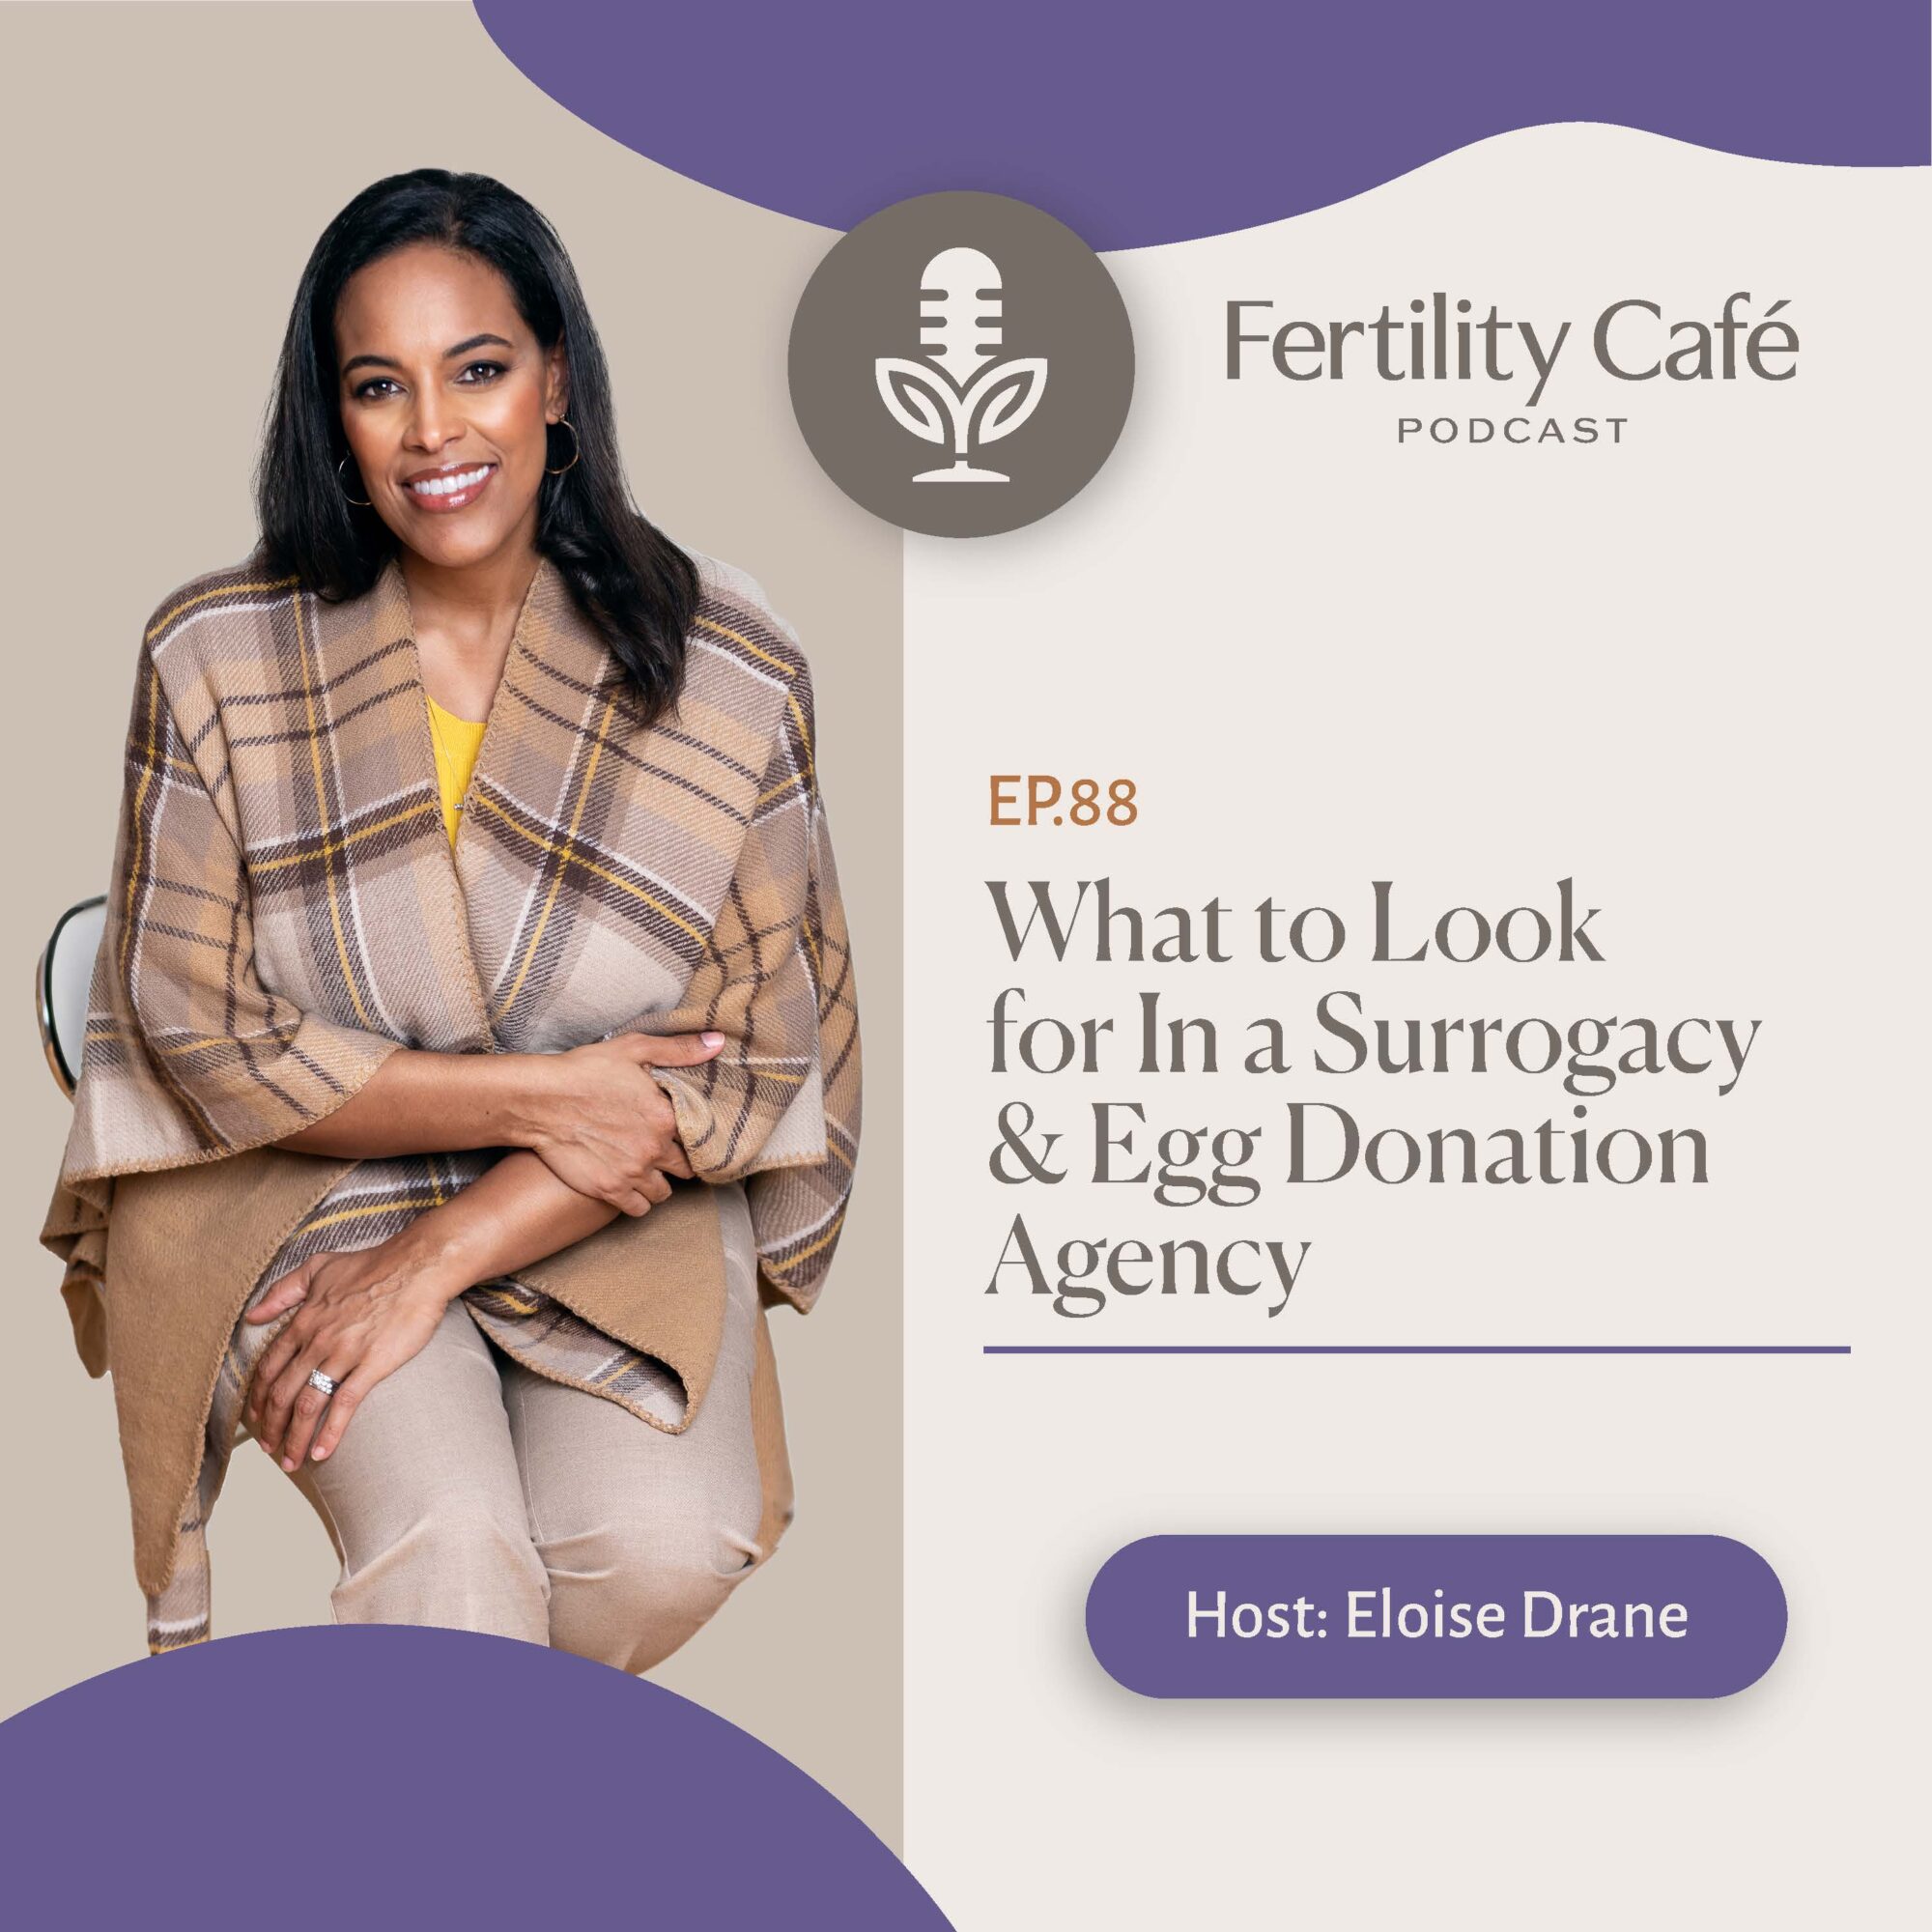 Ep 88 Transcript | What to Look for in a Surrogacy & Egg Donation Agency